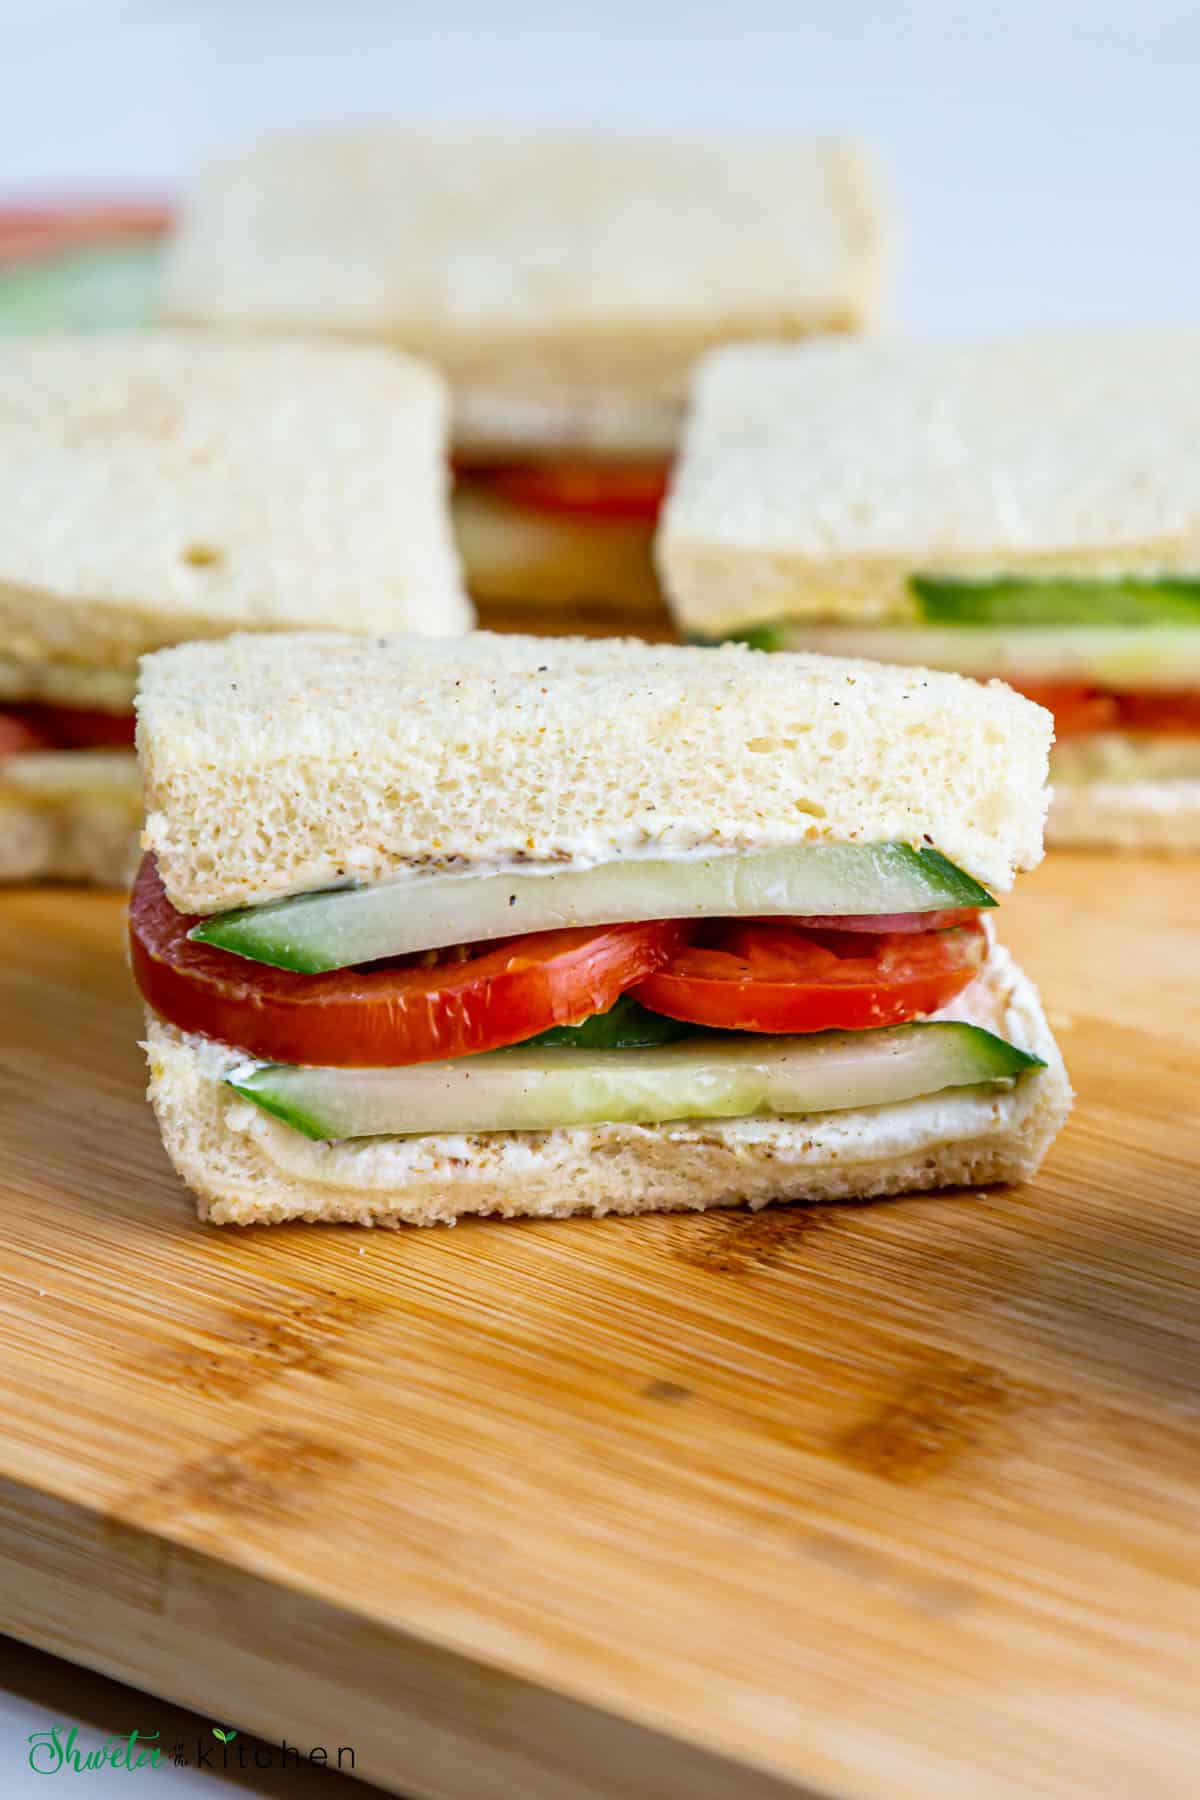 tomato and cucumber sandwich cut in half placed on wooden board